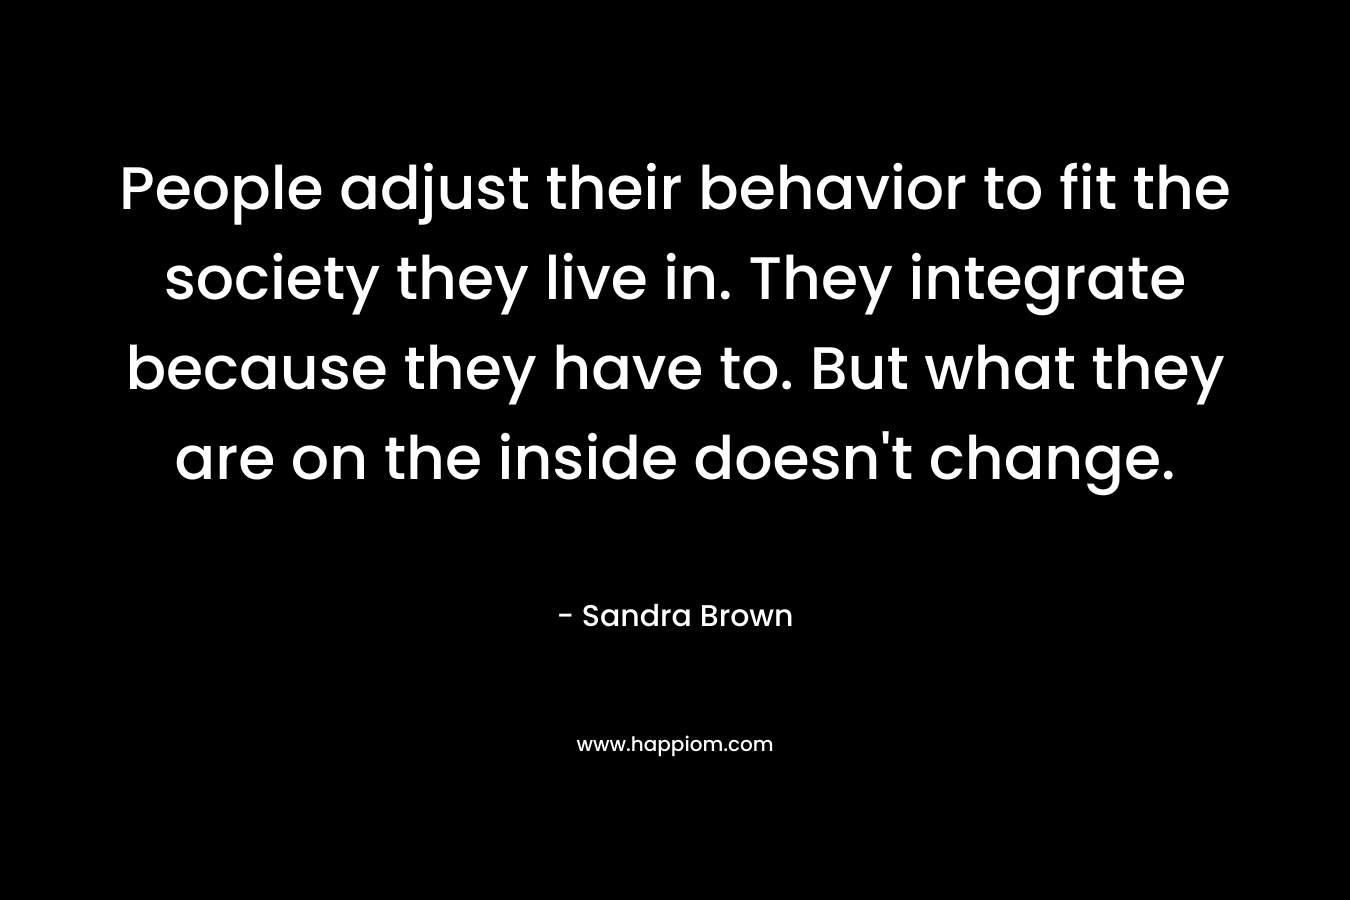 People adjust their behavior to fit the society they live in. They integrate because they have to. But what they are on the inside doesn’t change. – Sandra Brown